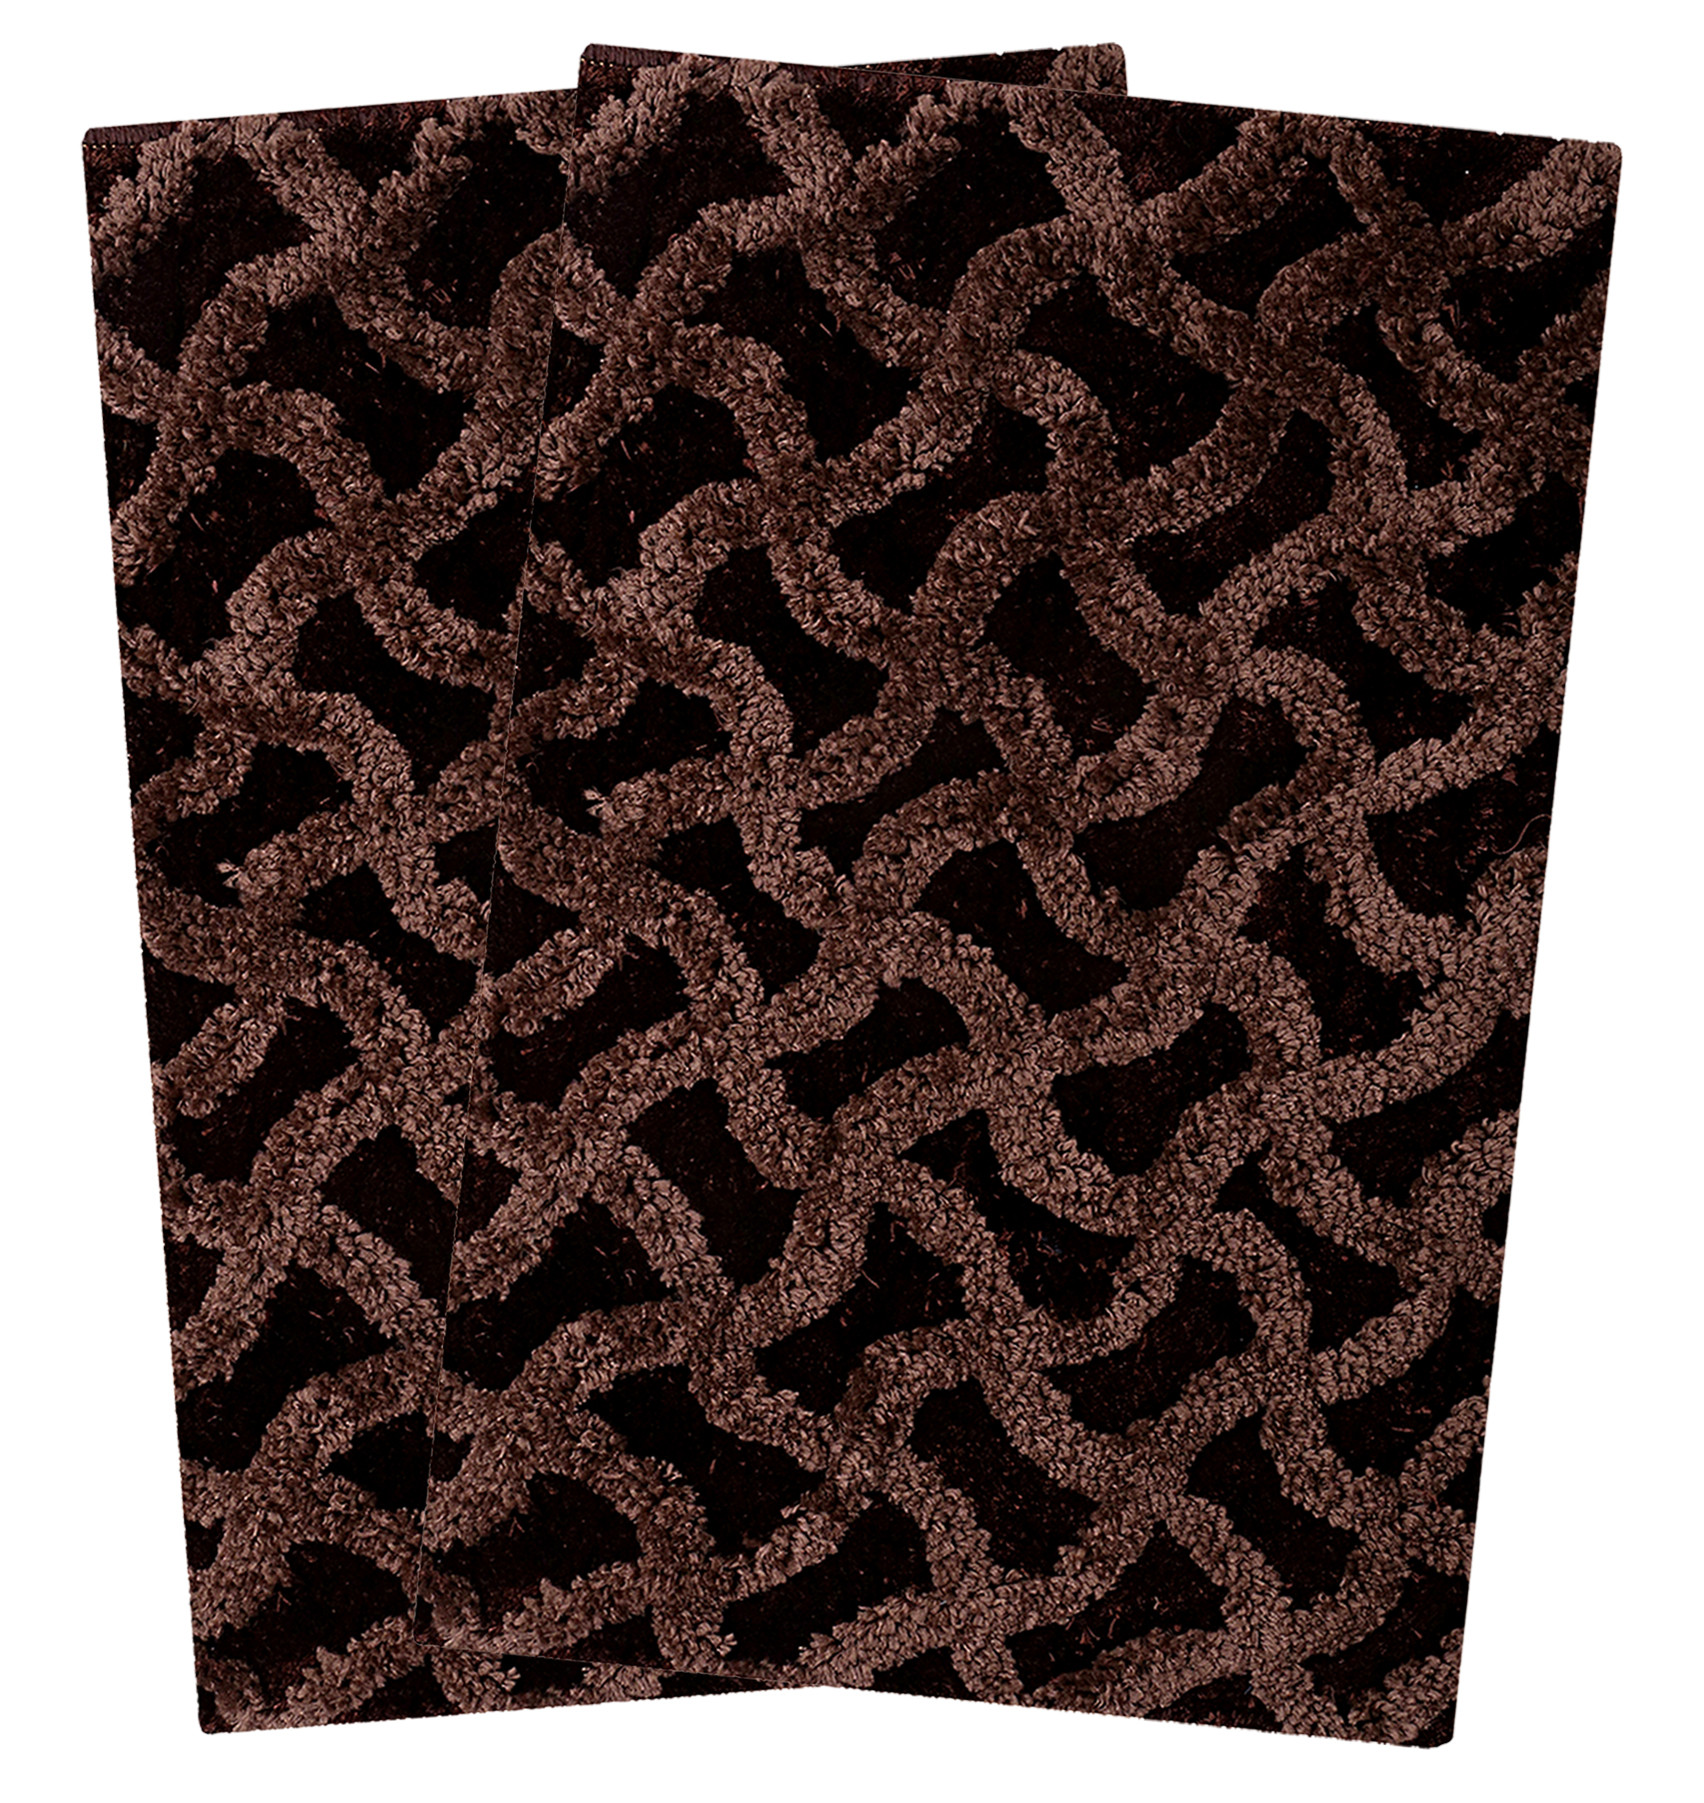 Kuber Industries Soft, lightweigth, Washable, Non Slip Doormat Entrance Rug Dirt Trapper Mat Shoes Scraper for Entry, Patio, Porch (Dark Brown)